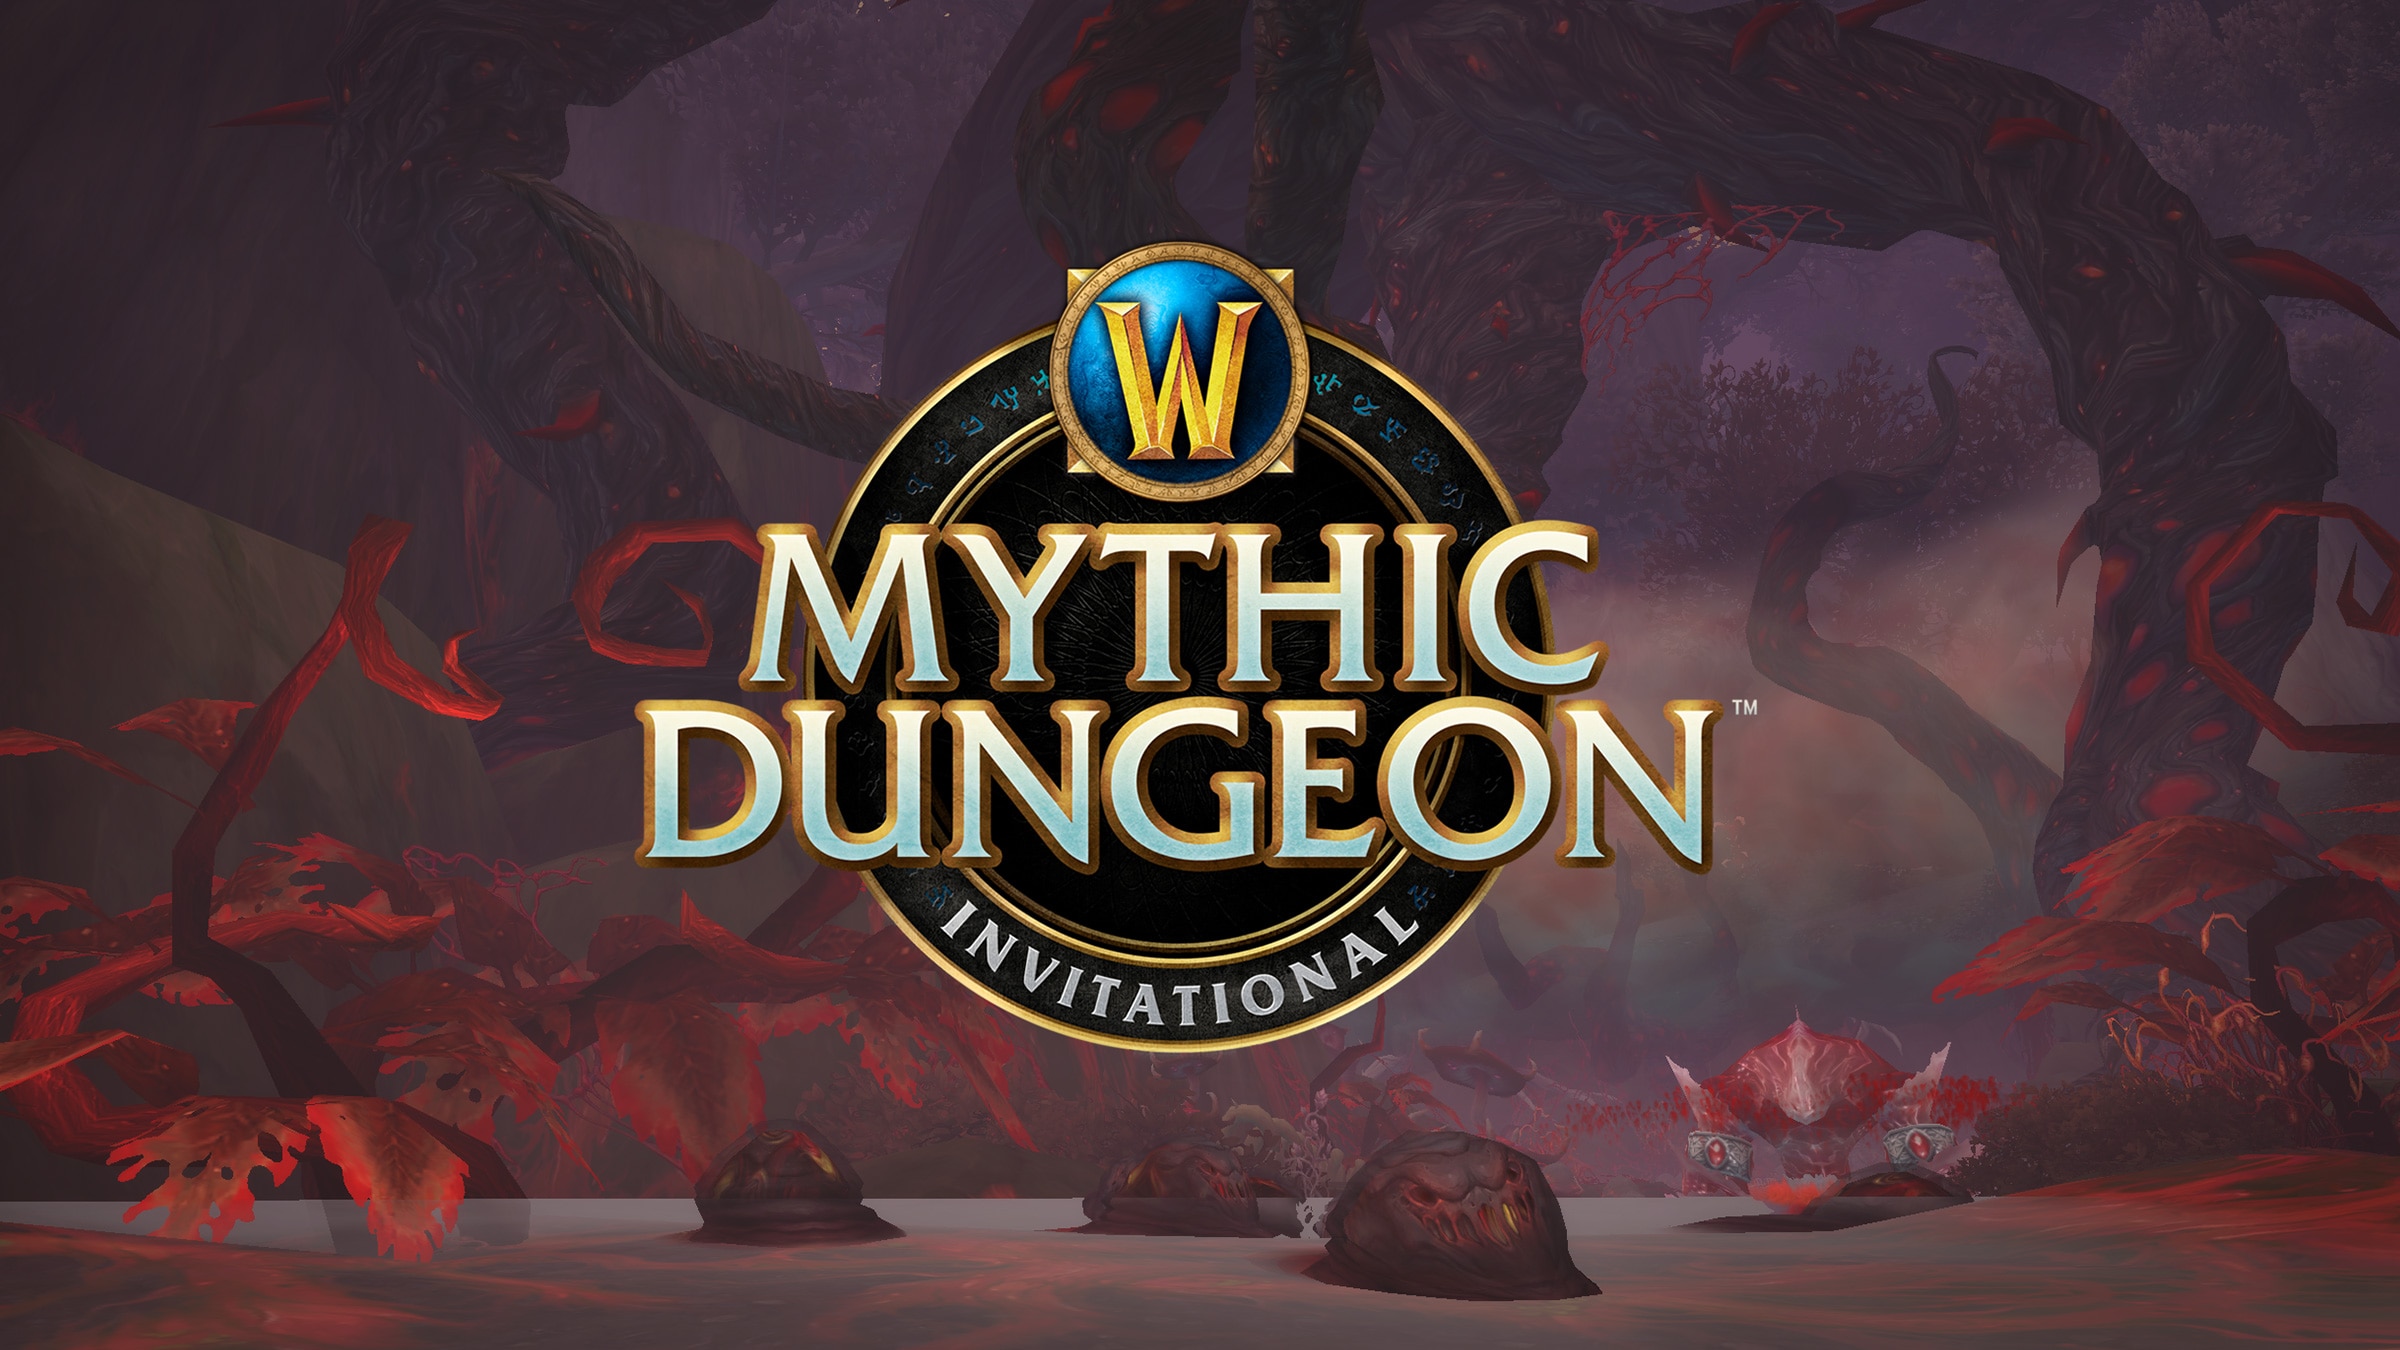 Mythic Dungeon Invitational: Prepping for the Time Trials